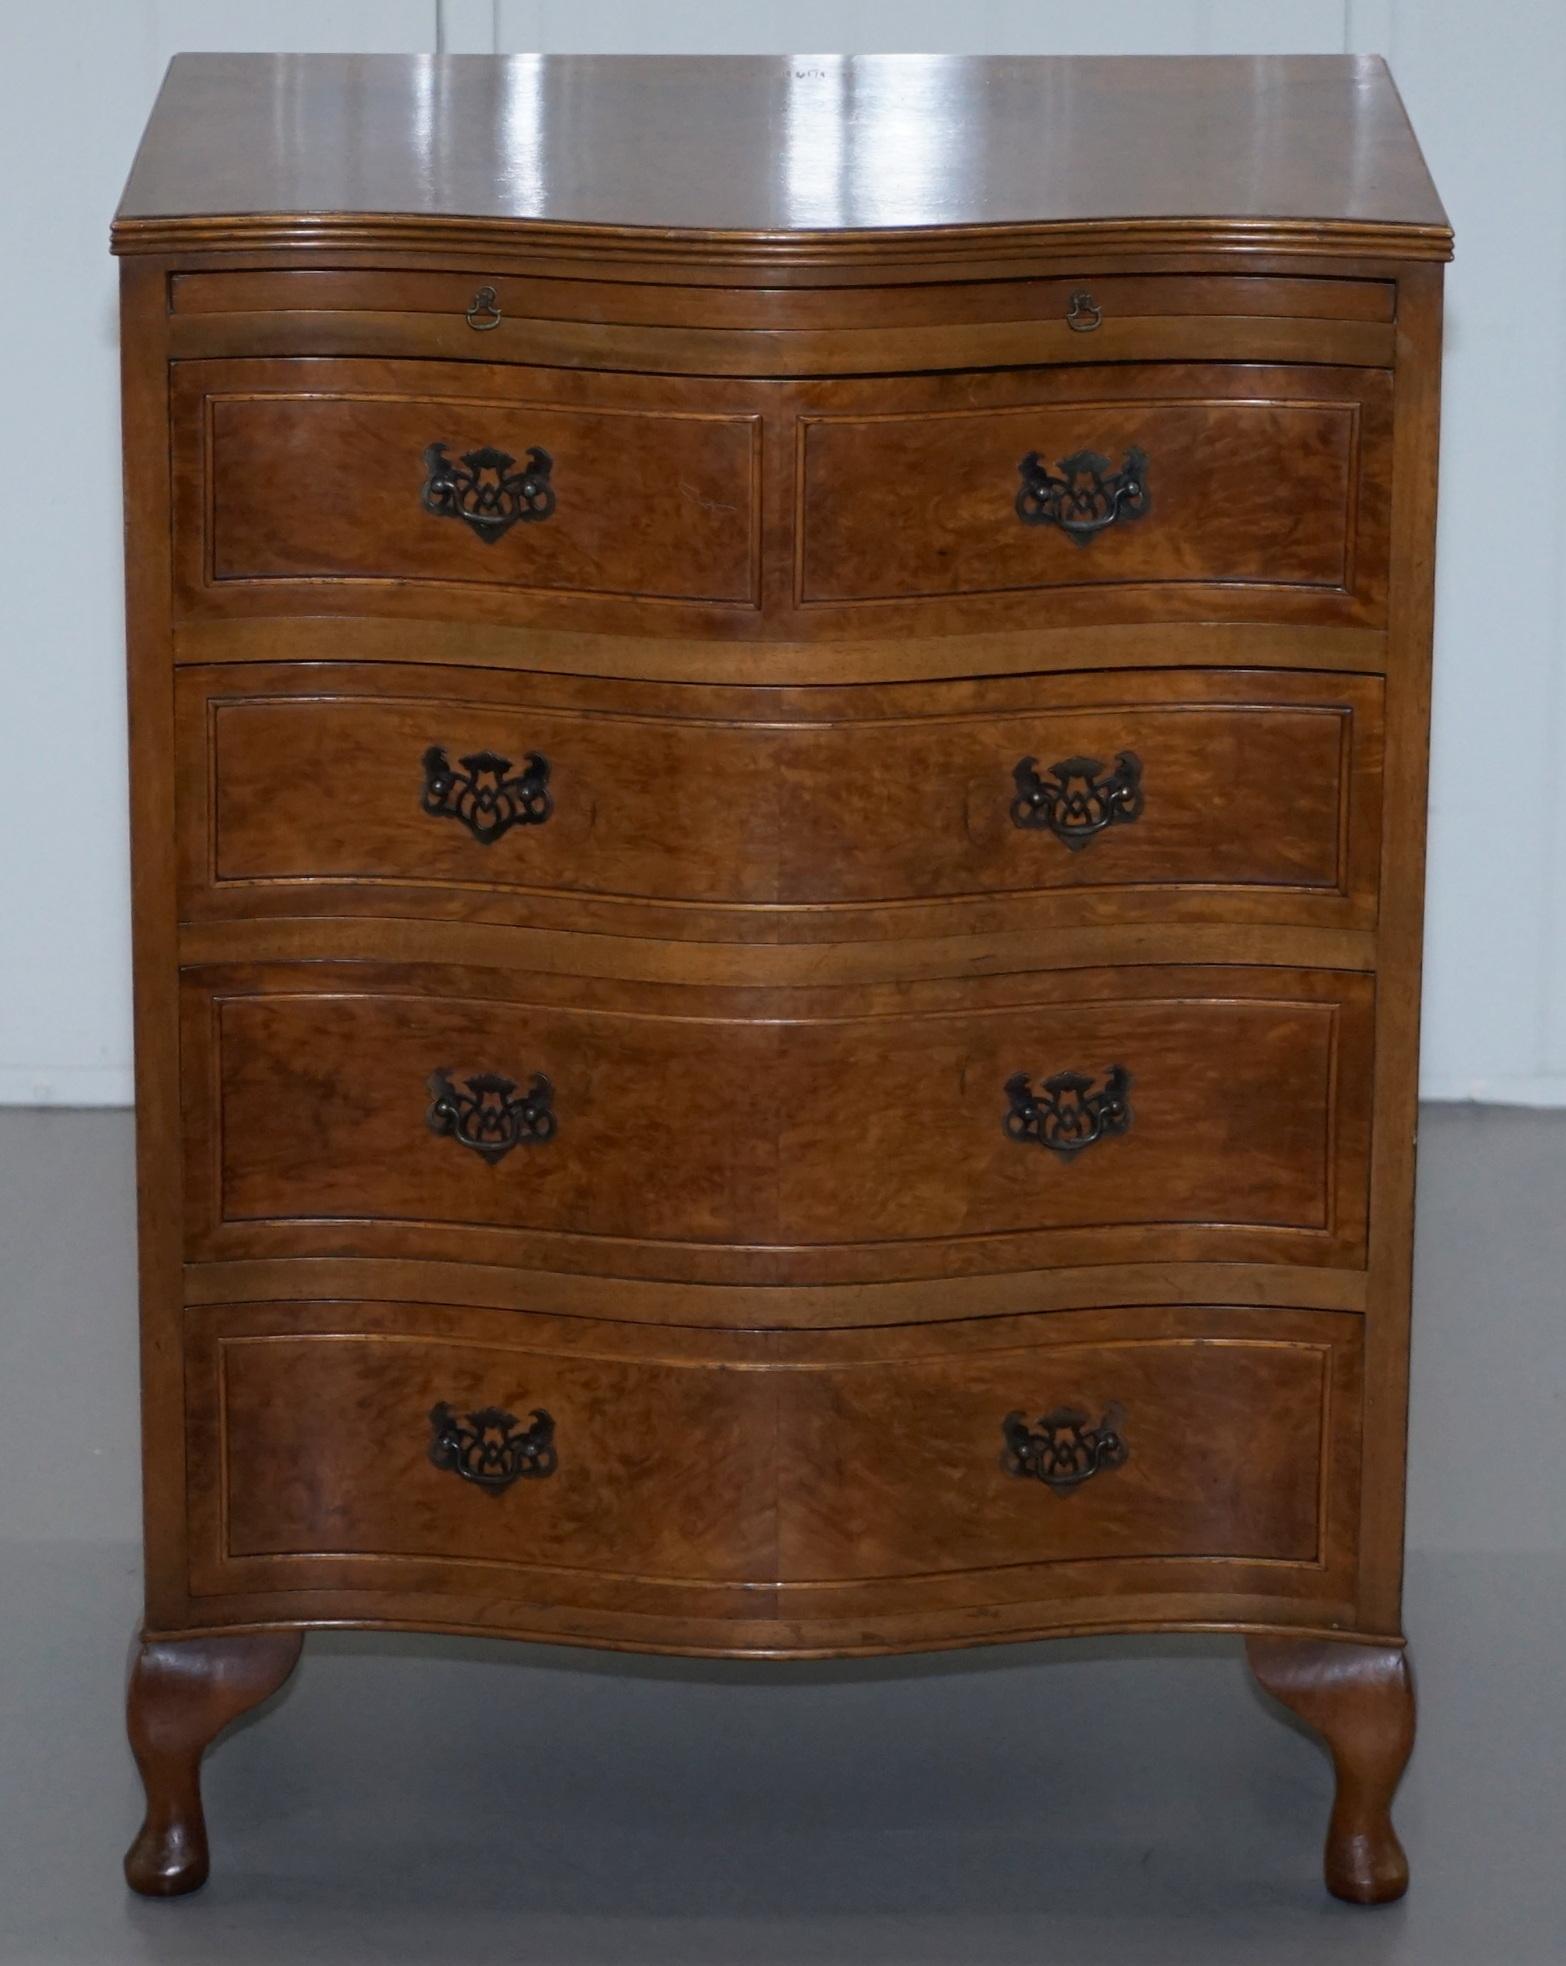 We are delighted to this lovely vintage burr walnut chest of drawers with butlers serving tray

A good looking, functional and well made piece of furniture, the drawers all open and close as they should, the serving tray is a nice feature it keeps